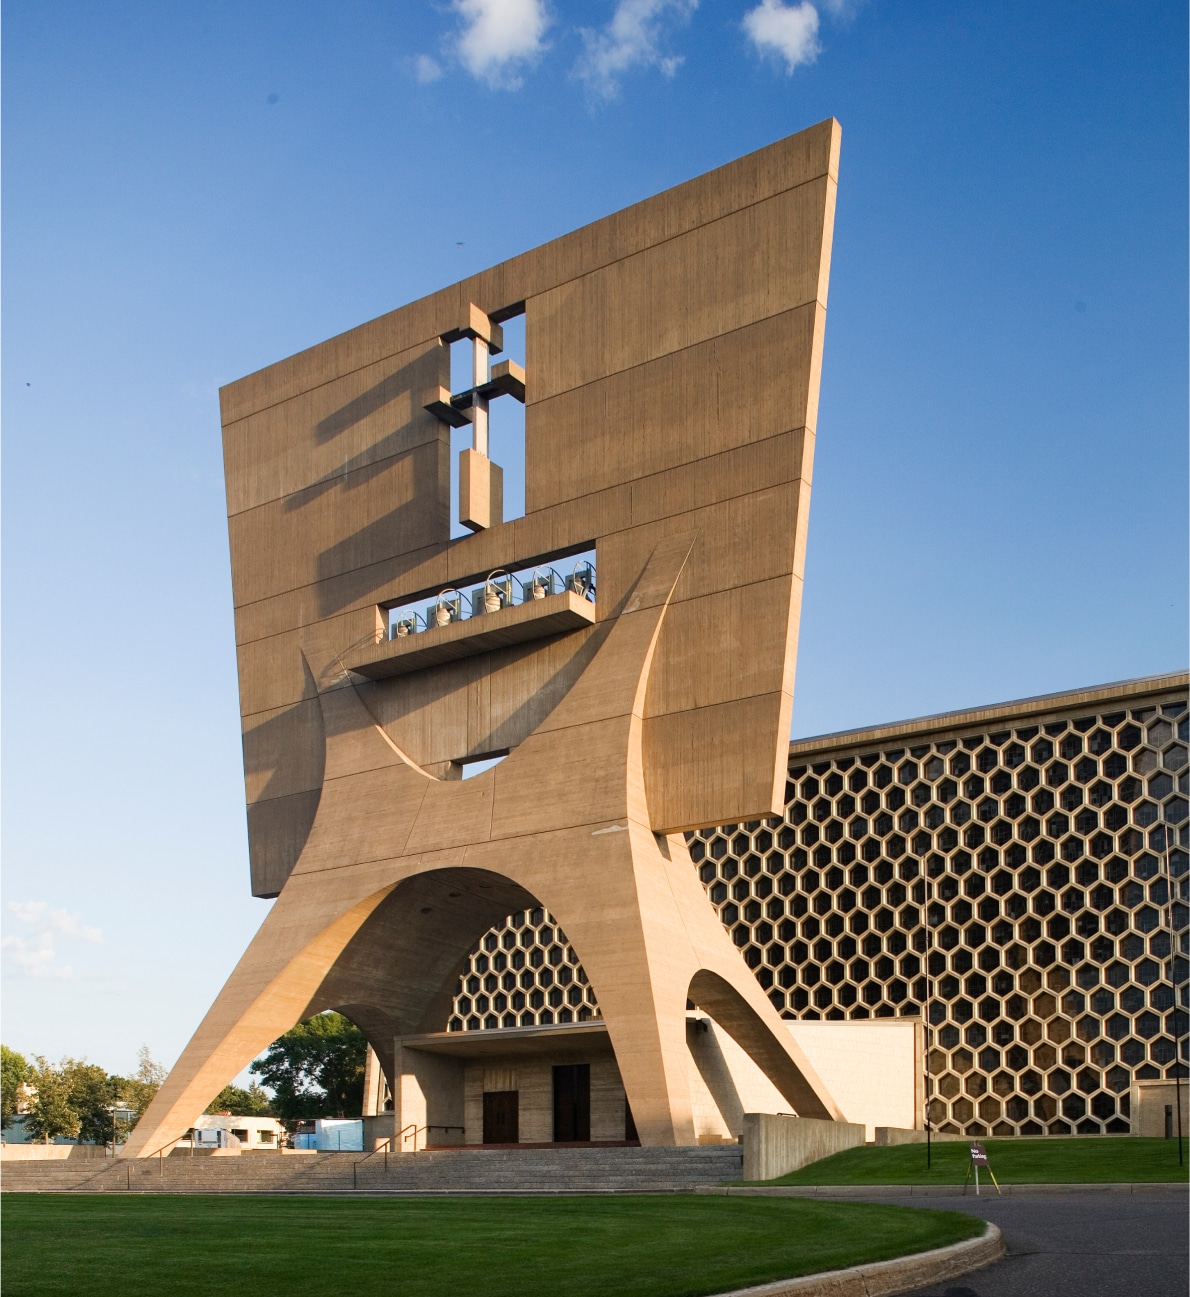 Image of St. John's Abbey in Collegeville, MN, built by McGough